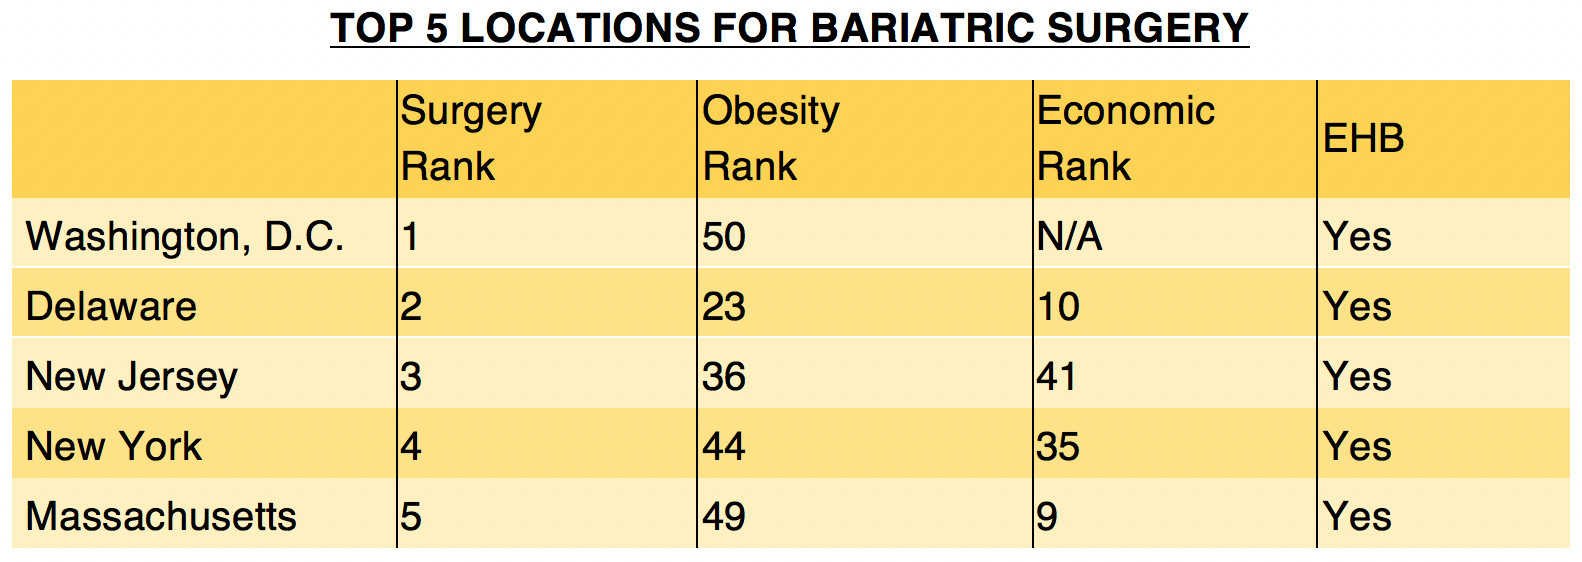 TOP 5 LOCATIONS FOR BARIATRIC SURGERY